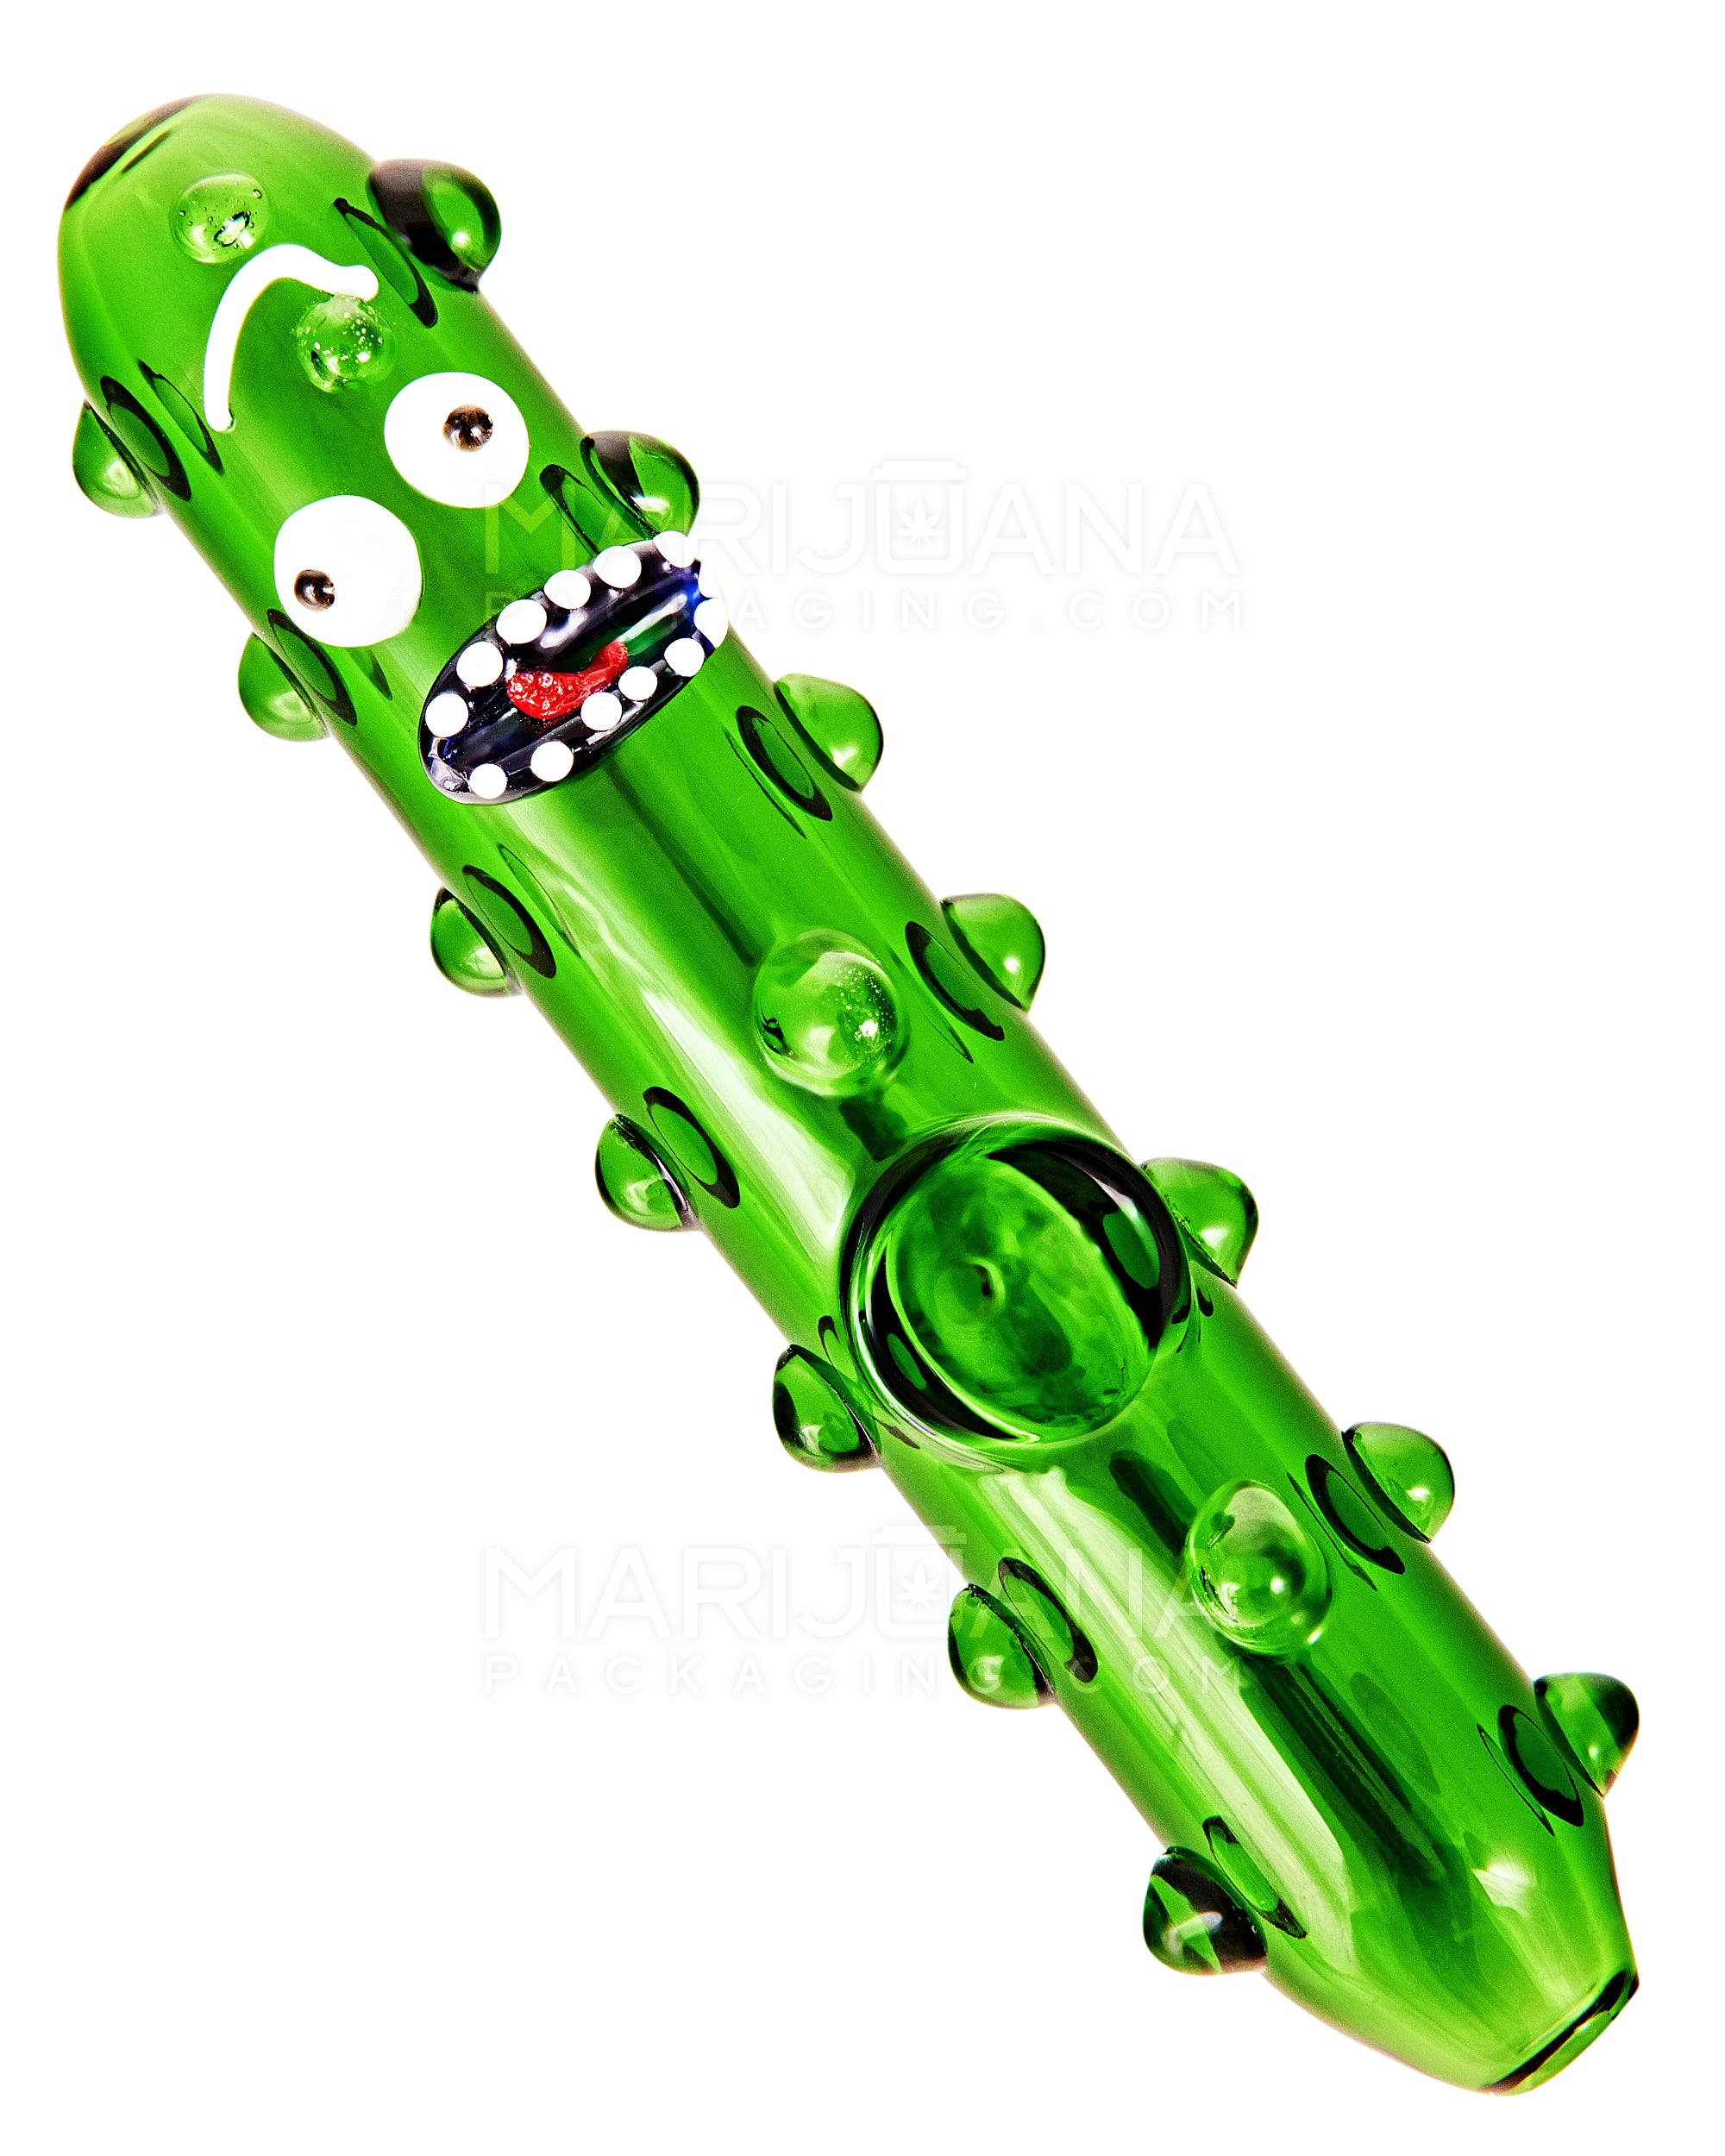 Pickle Rick Steamroller Hand Pipe w/ Multi Knockers | 5.5in Long - Glass - Green - 1